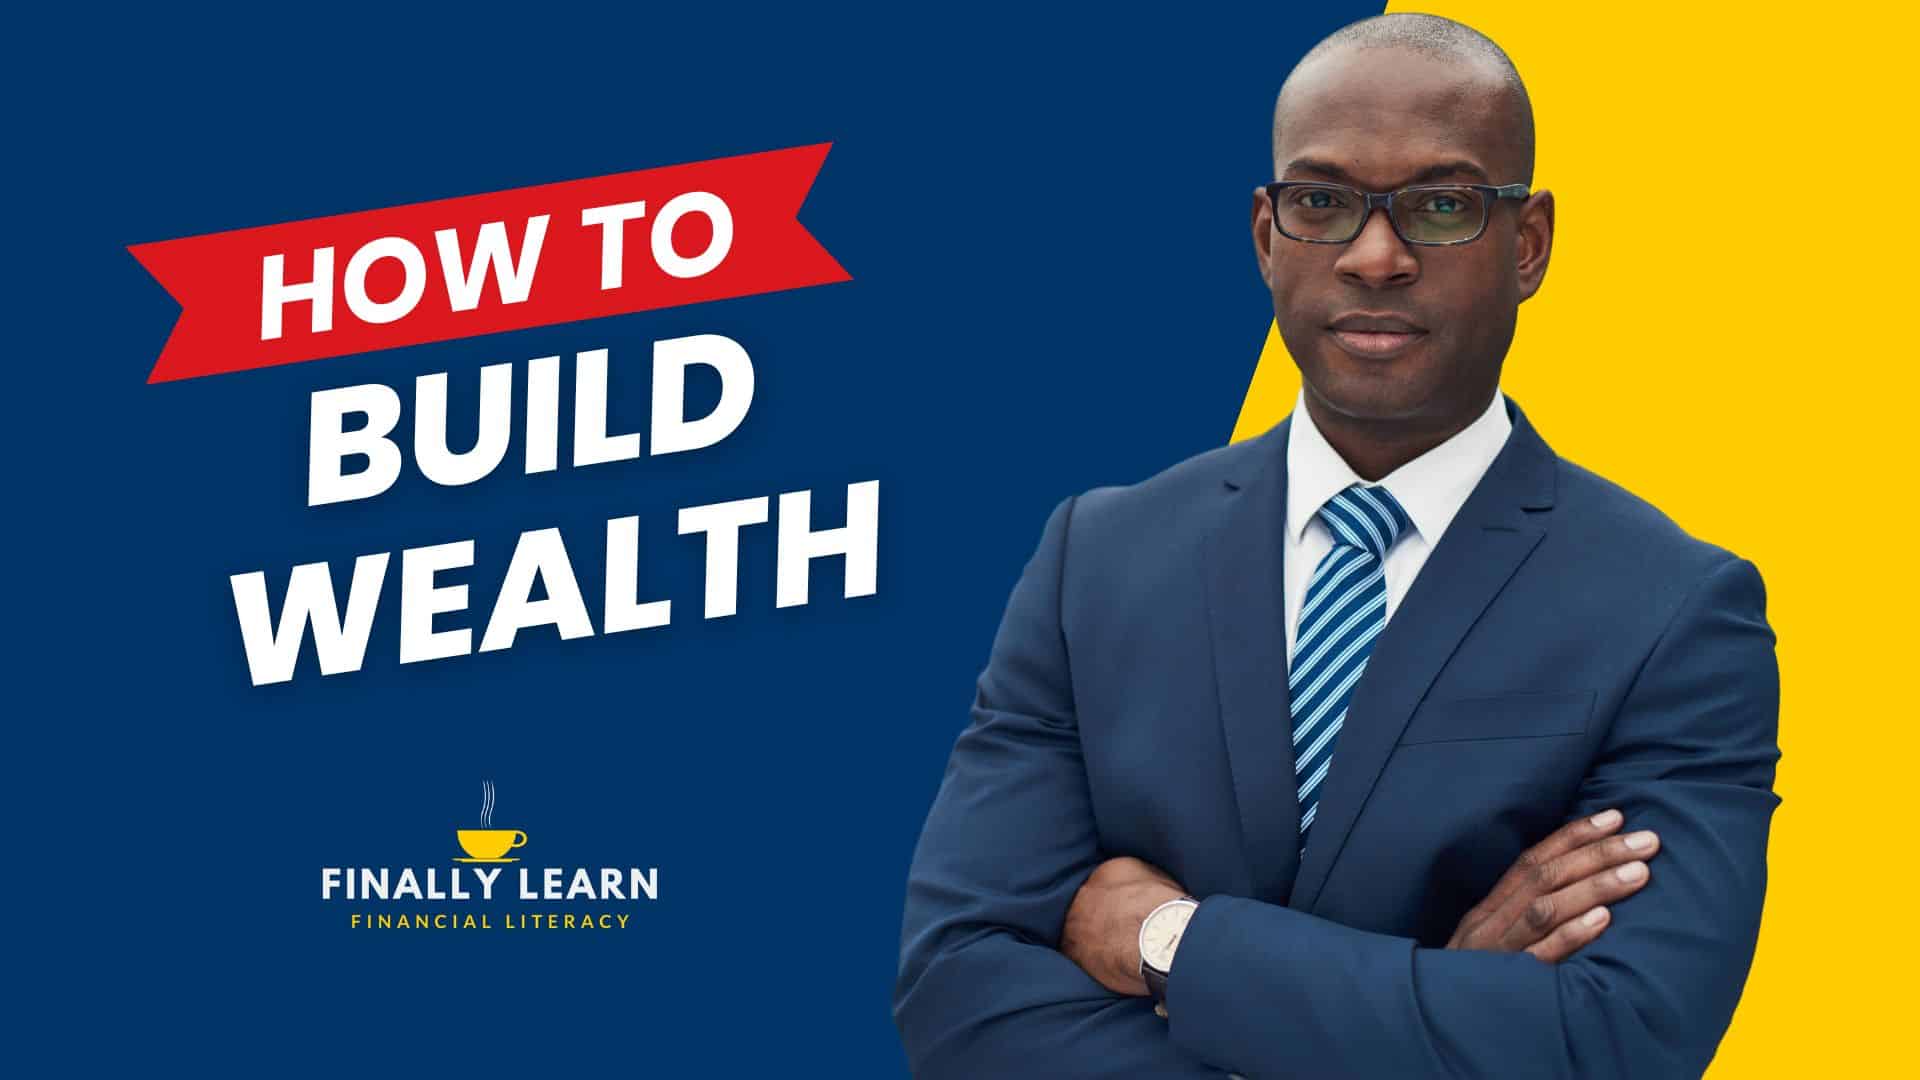 How to Build Wealth: 10 Tips for Financial Freedom - Finally Learn